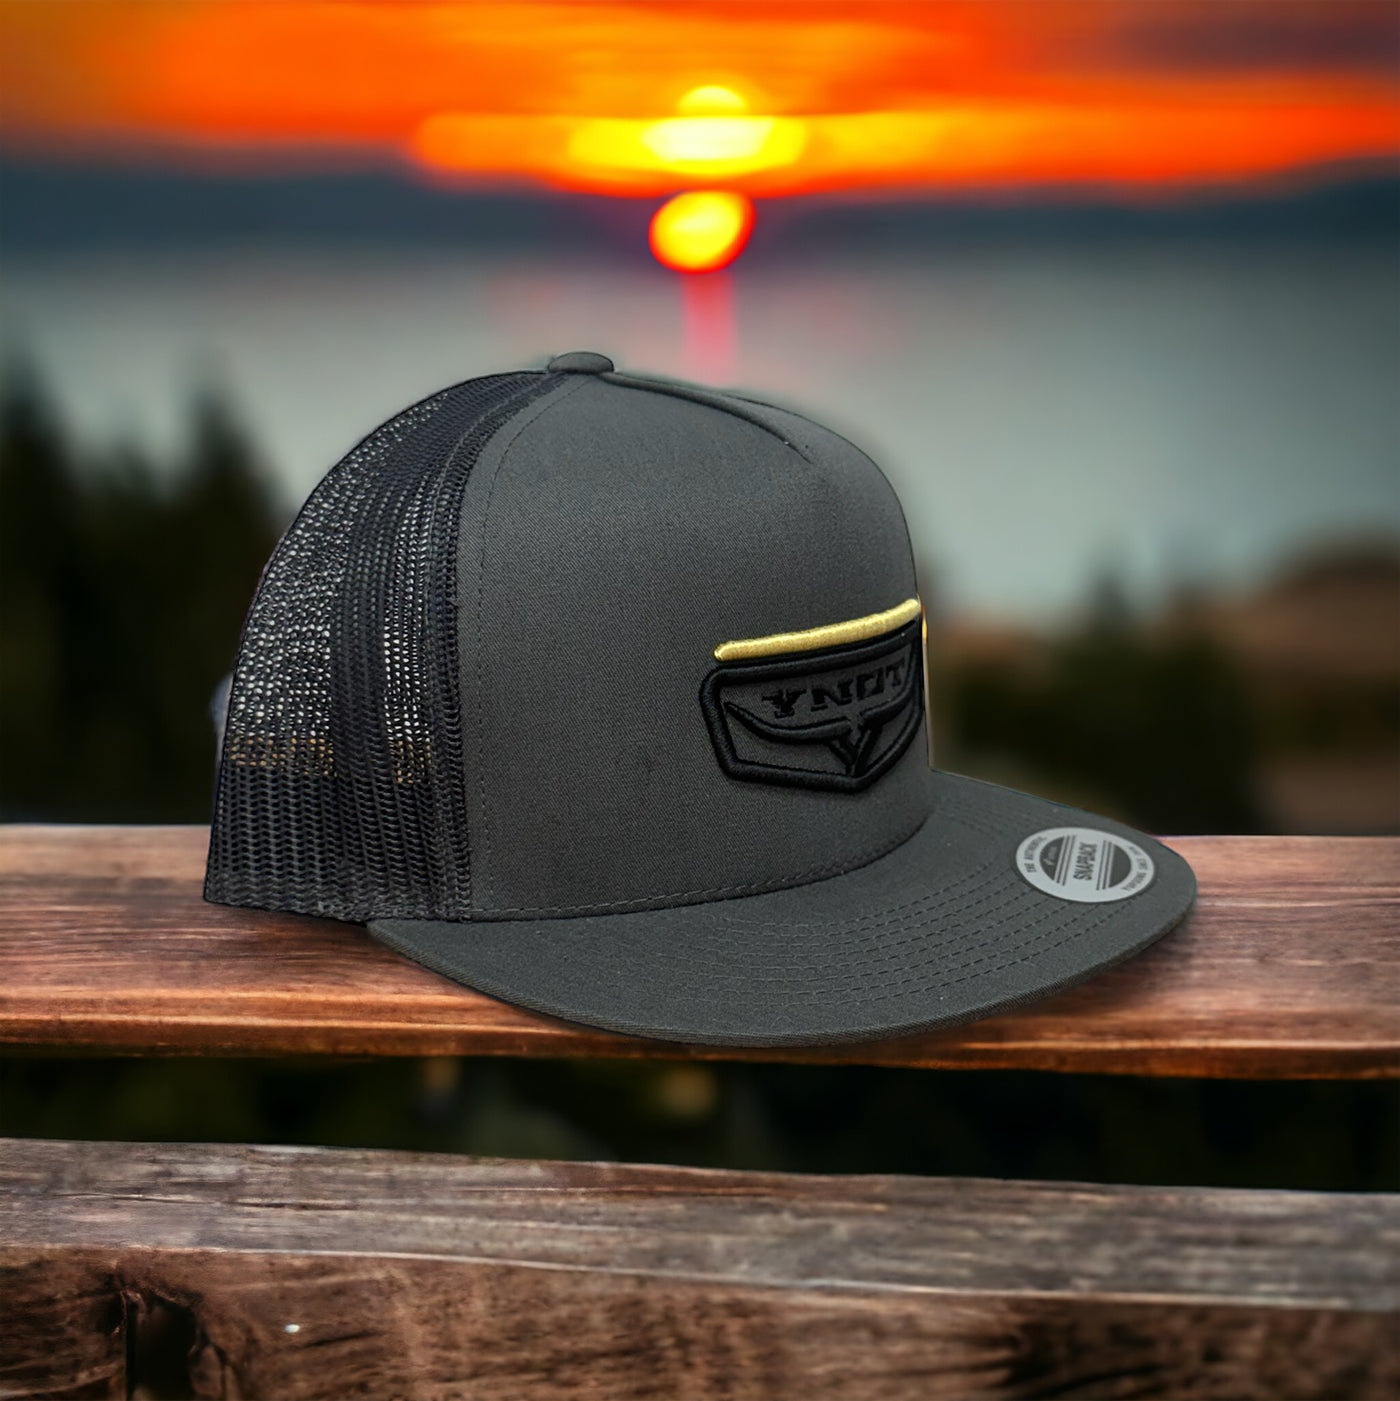 YNOT Lifestyle Brand Hat and Apparel - Embroidered, Snapback Hat - Trucker Cap - Baseball Cap - Western Wear - Quality Farmer & Rancher Hats